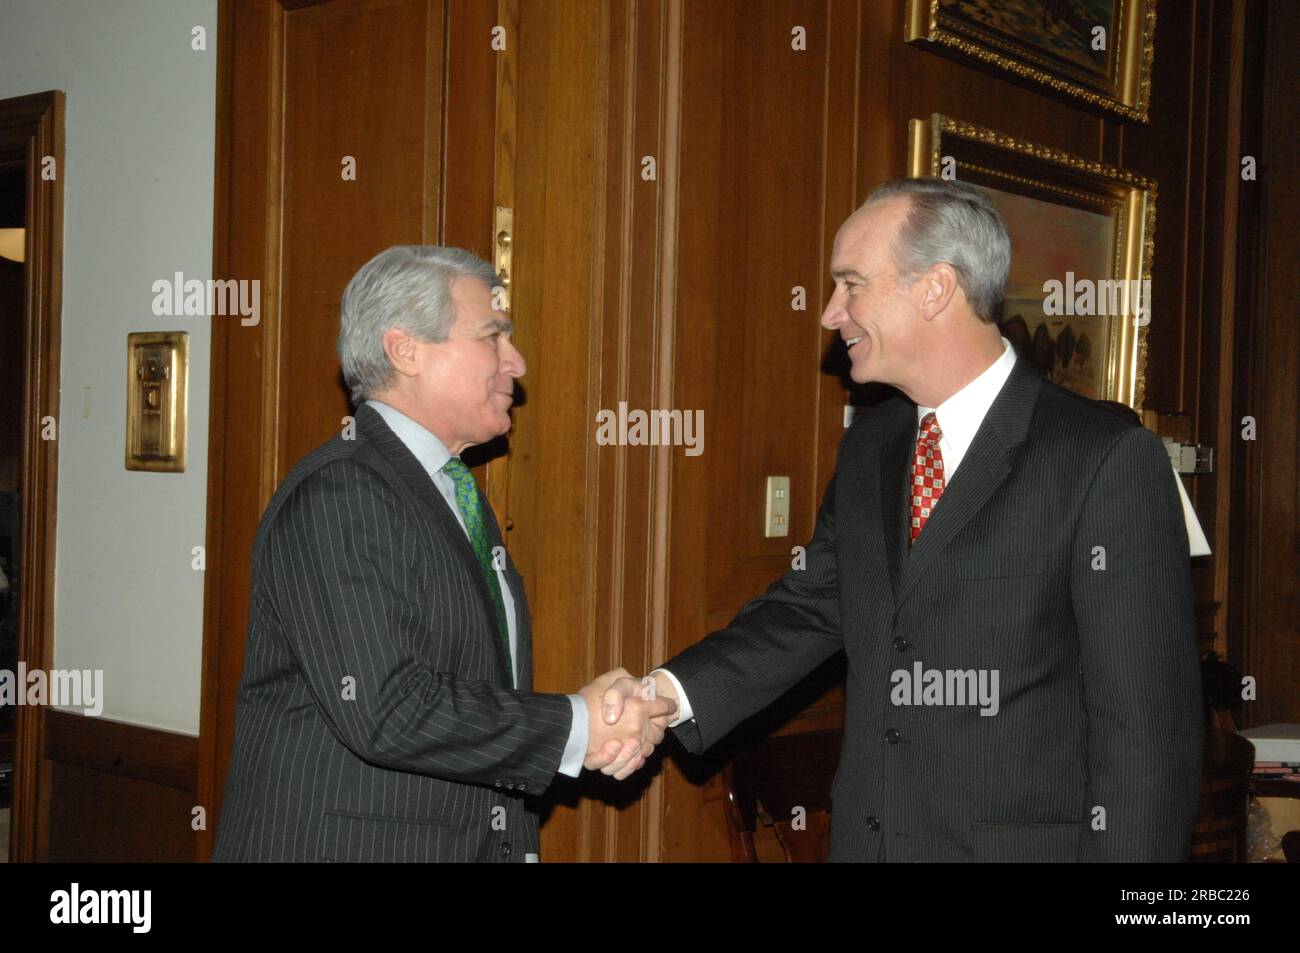 Secretary Dirk Kempthorne receiving visit at Main Interior from Philip Lader, head of the global media and comunications firm, WPP Group, and former U.S. Ambassador to the United Kingdom, as well as former Administrator of the Small Business Administration Stock Photo